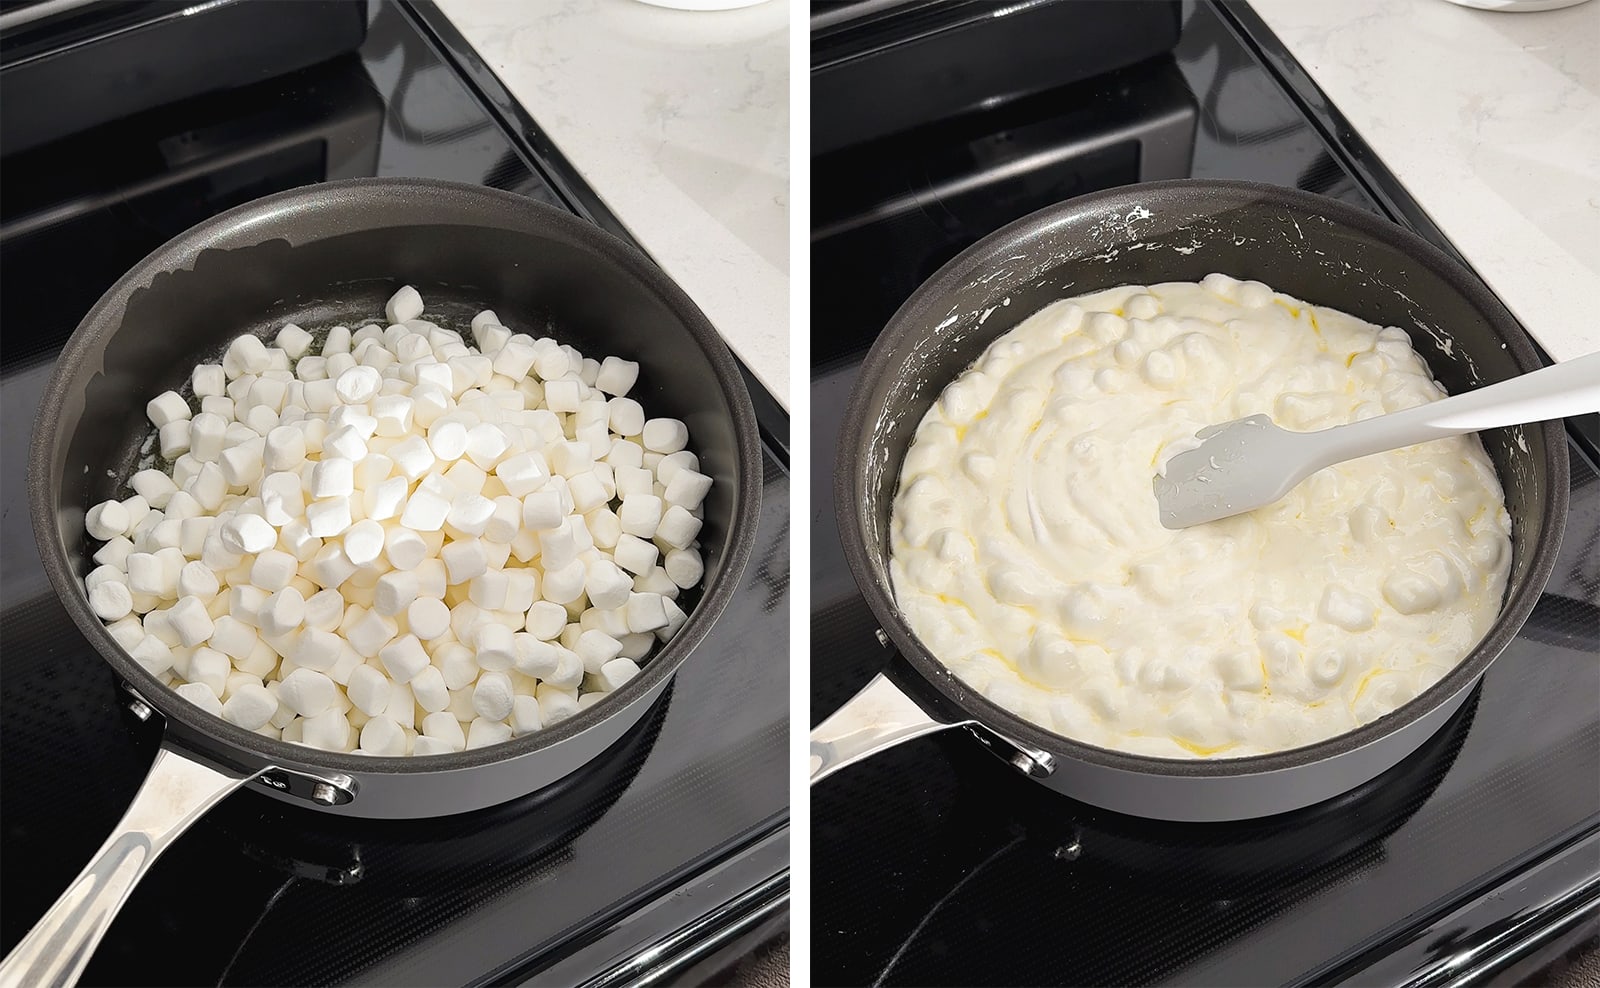 Left to right: mini marshmallows in a pan, melted marshmallows in a pan.